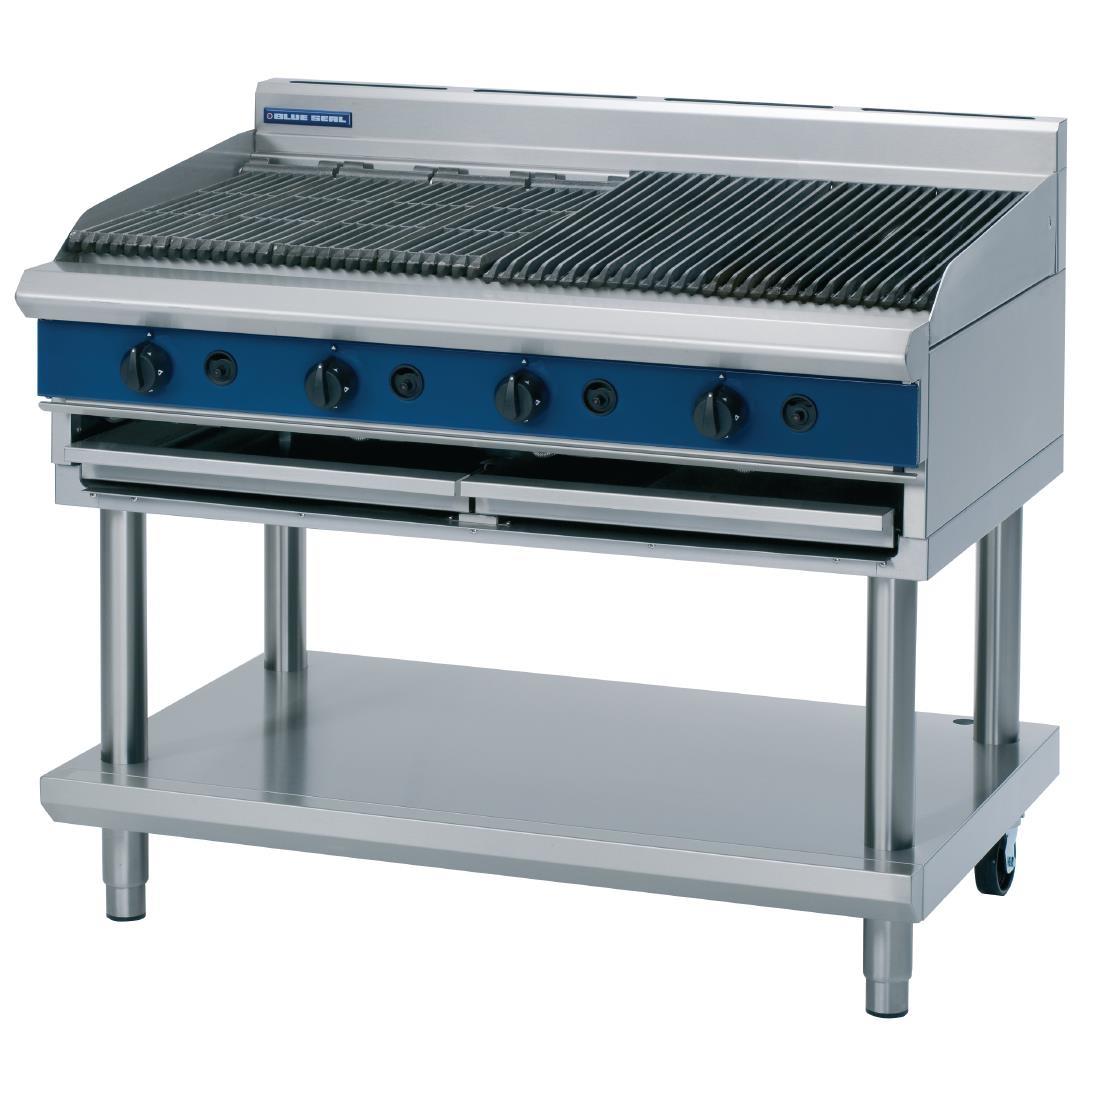 Blue Seal Evolution Chargrill with Leg Stand Nat Gas 1200mm G598-LS/N - GK580-N  - 1